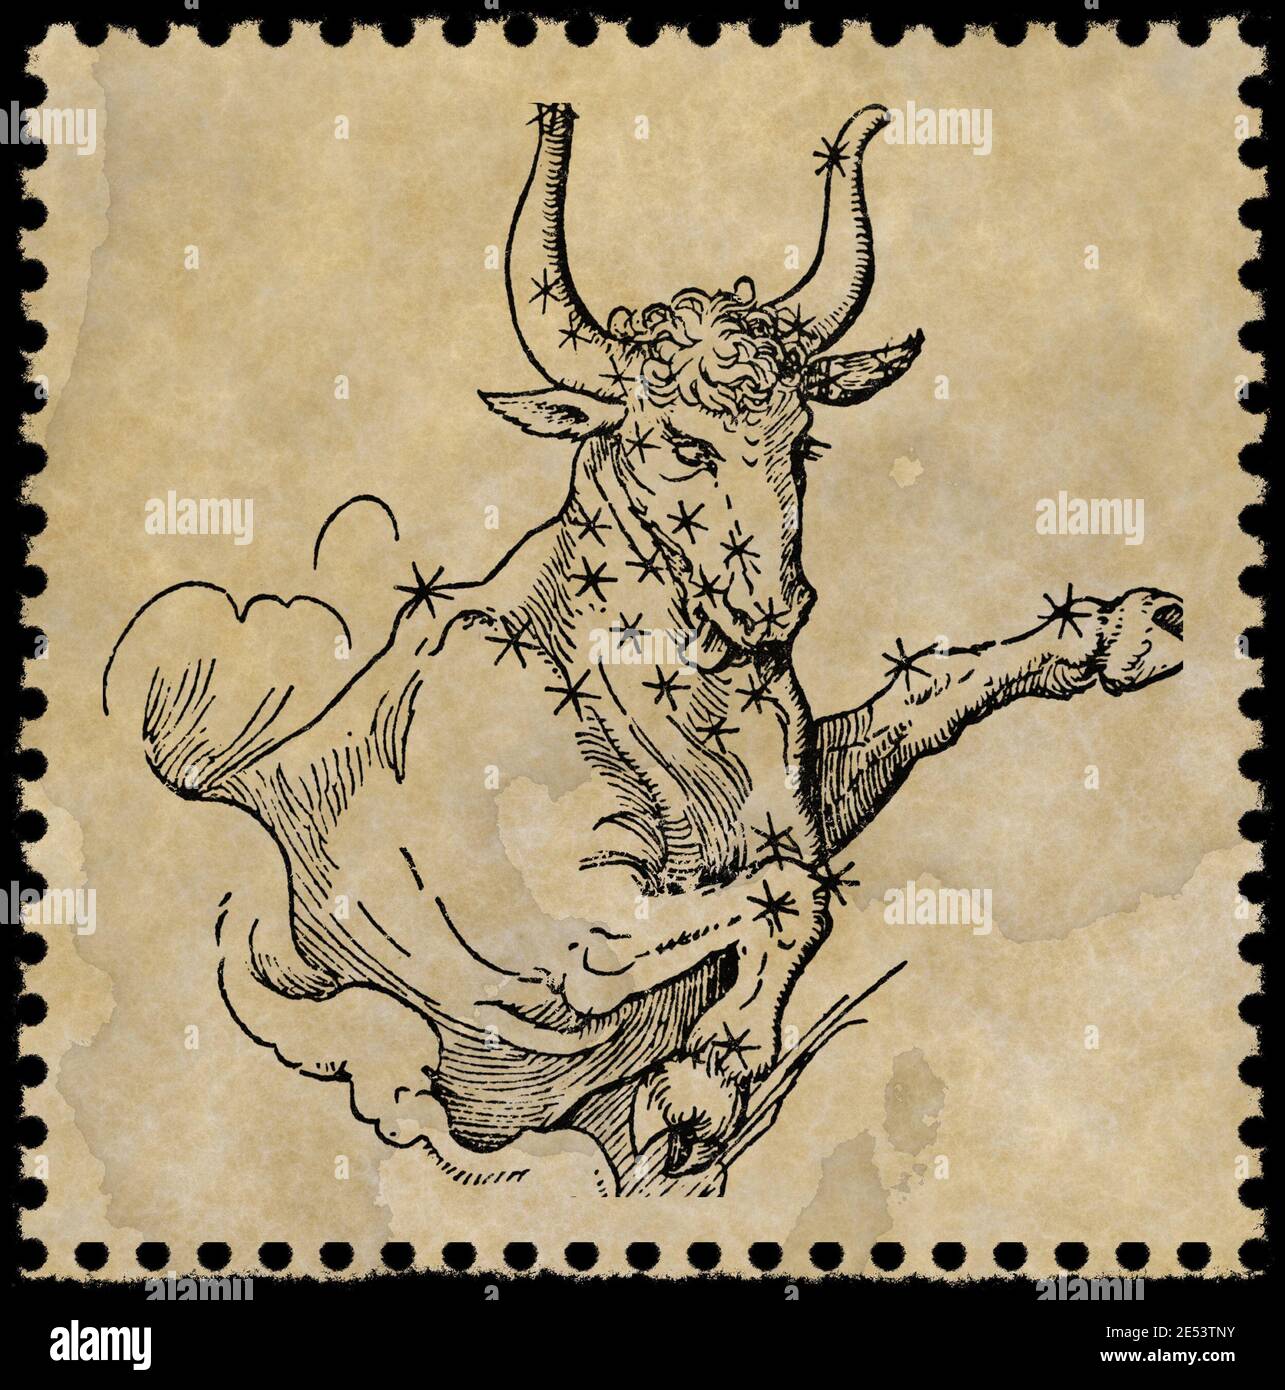 stamp with astrological symbols of the zodiac sign Taurus Stock Photo